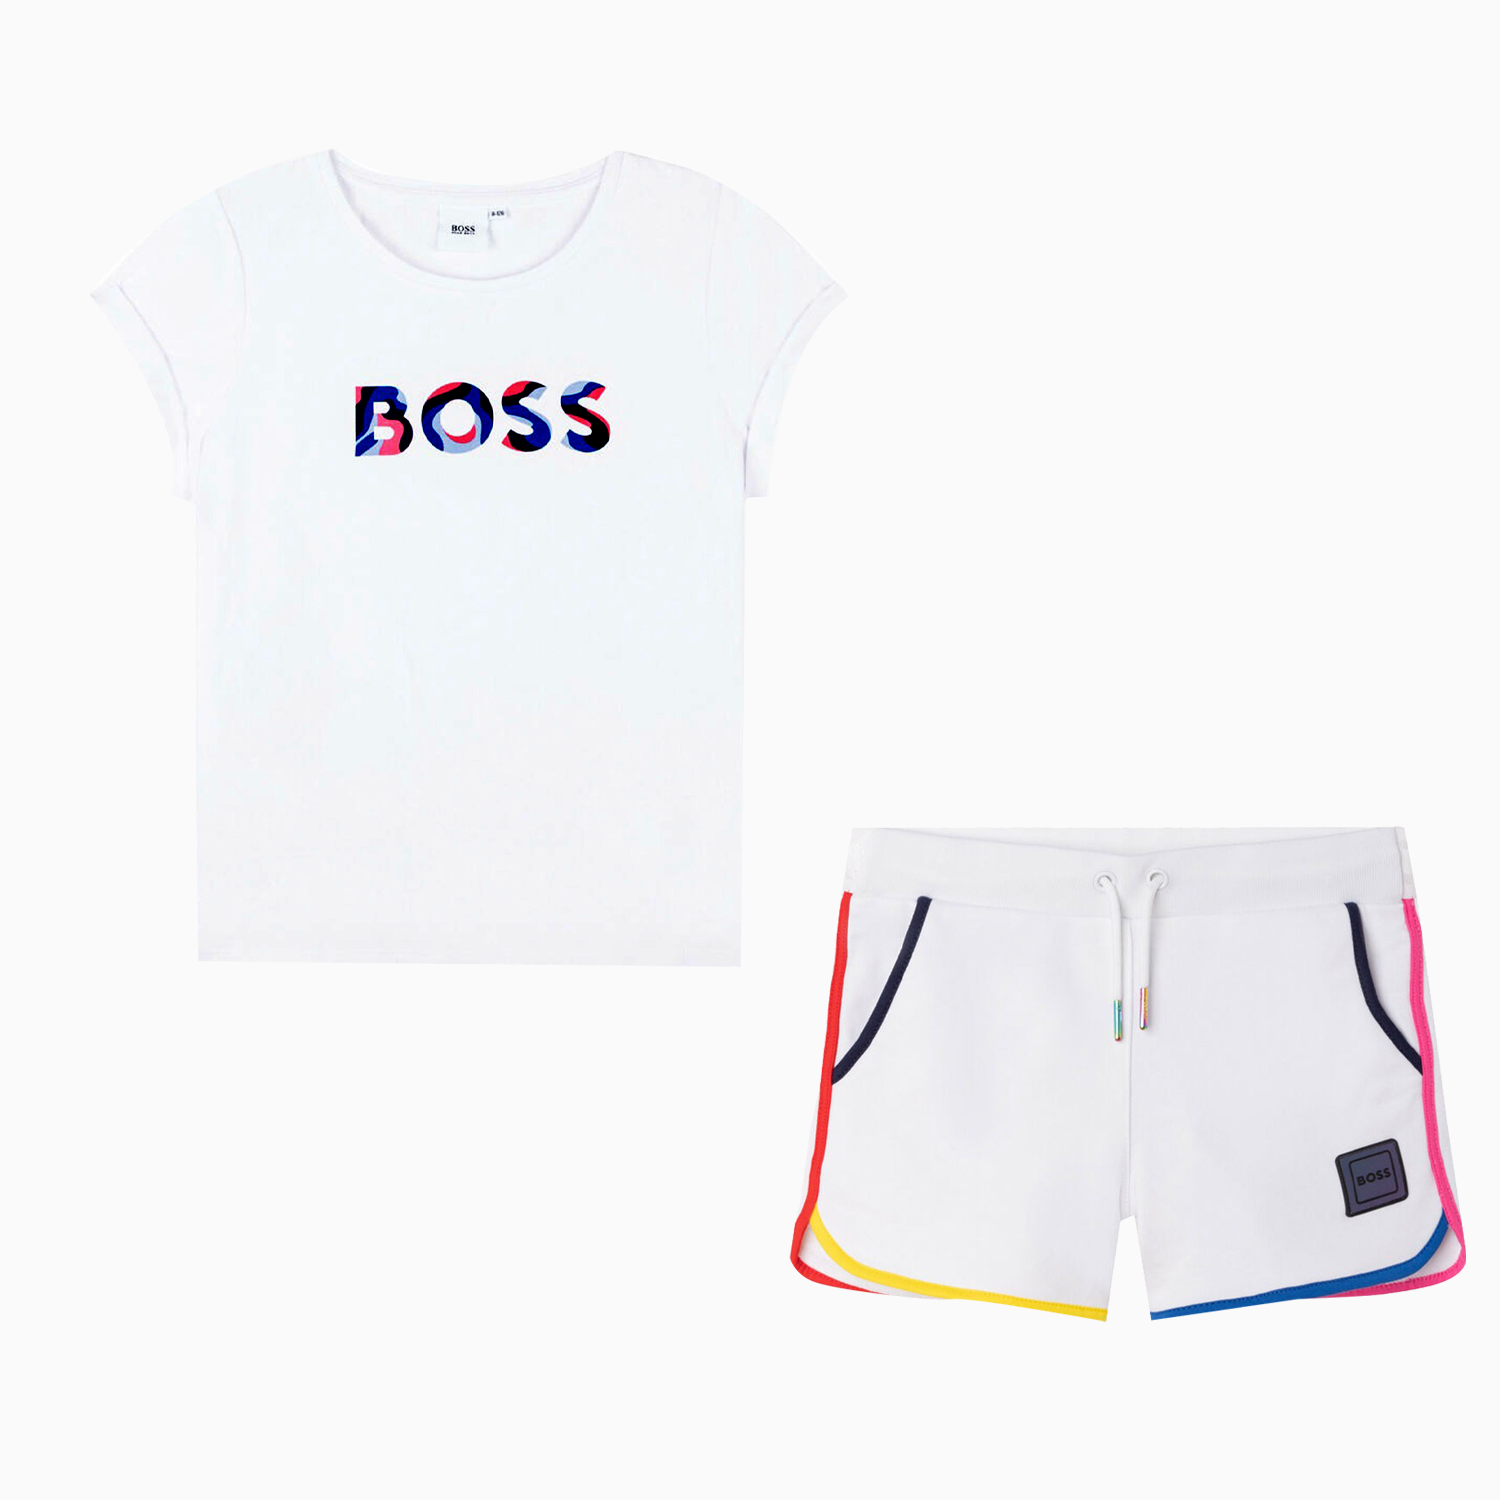 Hugo Boss Kid's French Terry Outfit Toddlers - Color: White - Kids Premium Clothing -